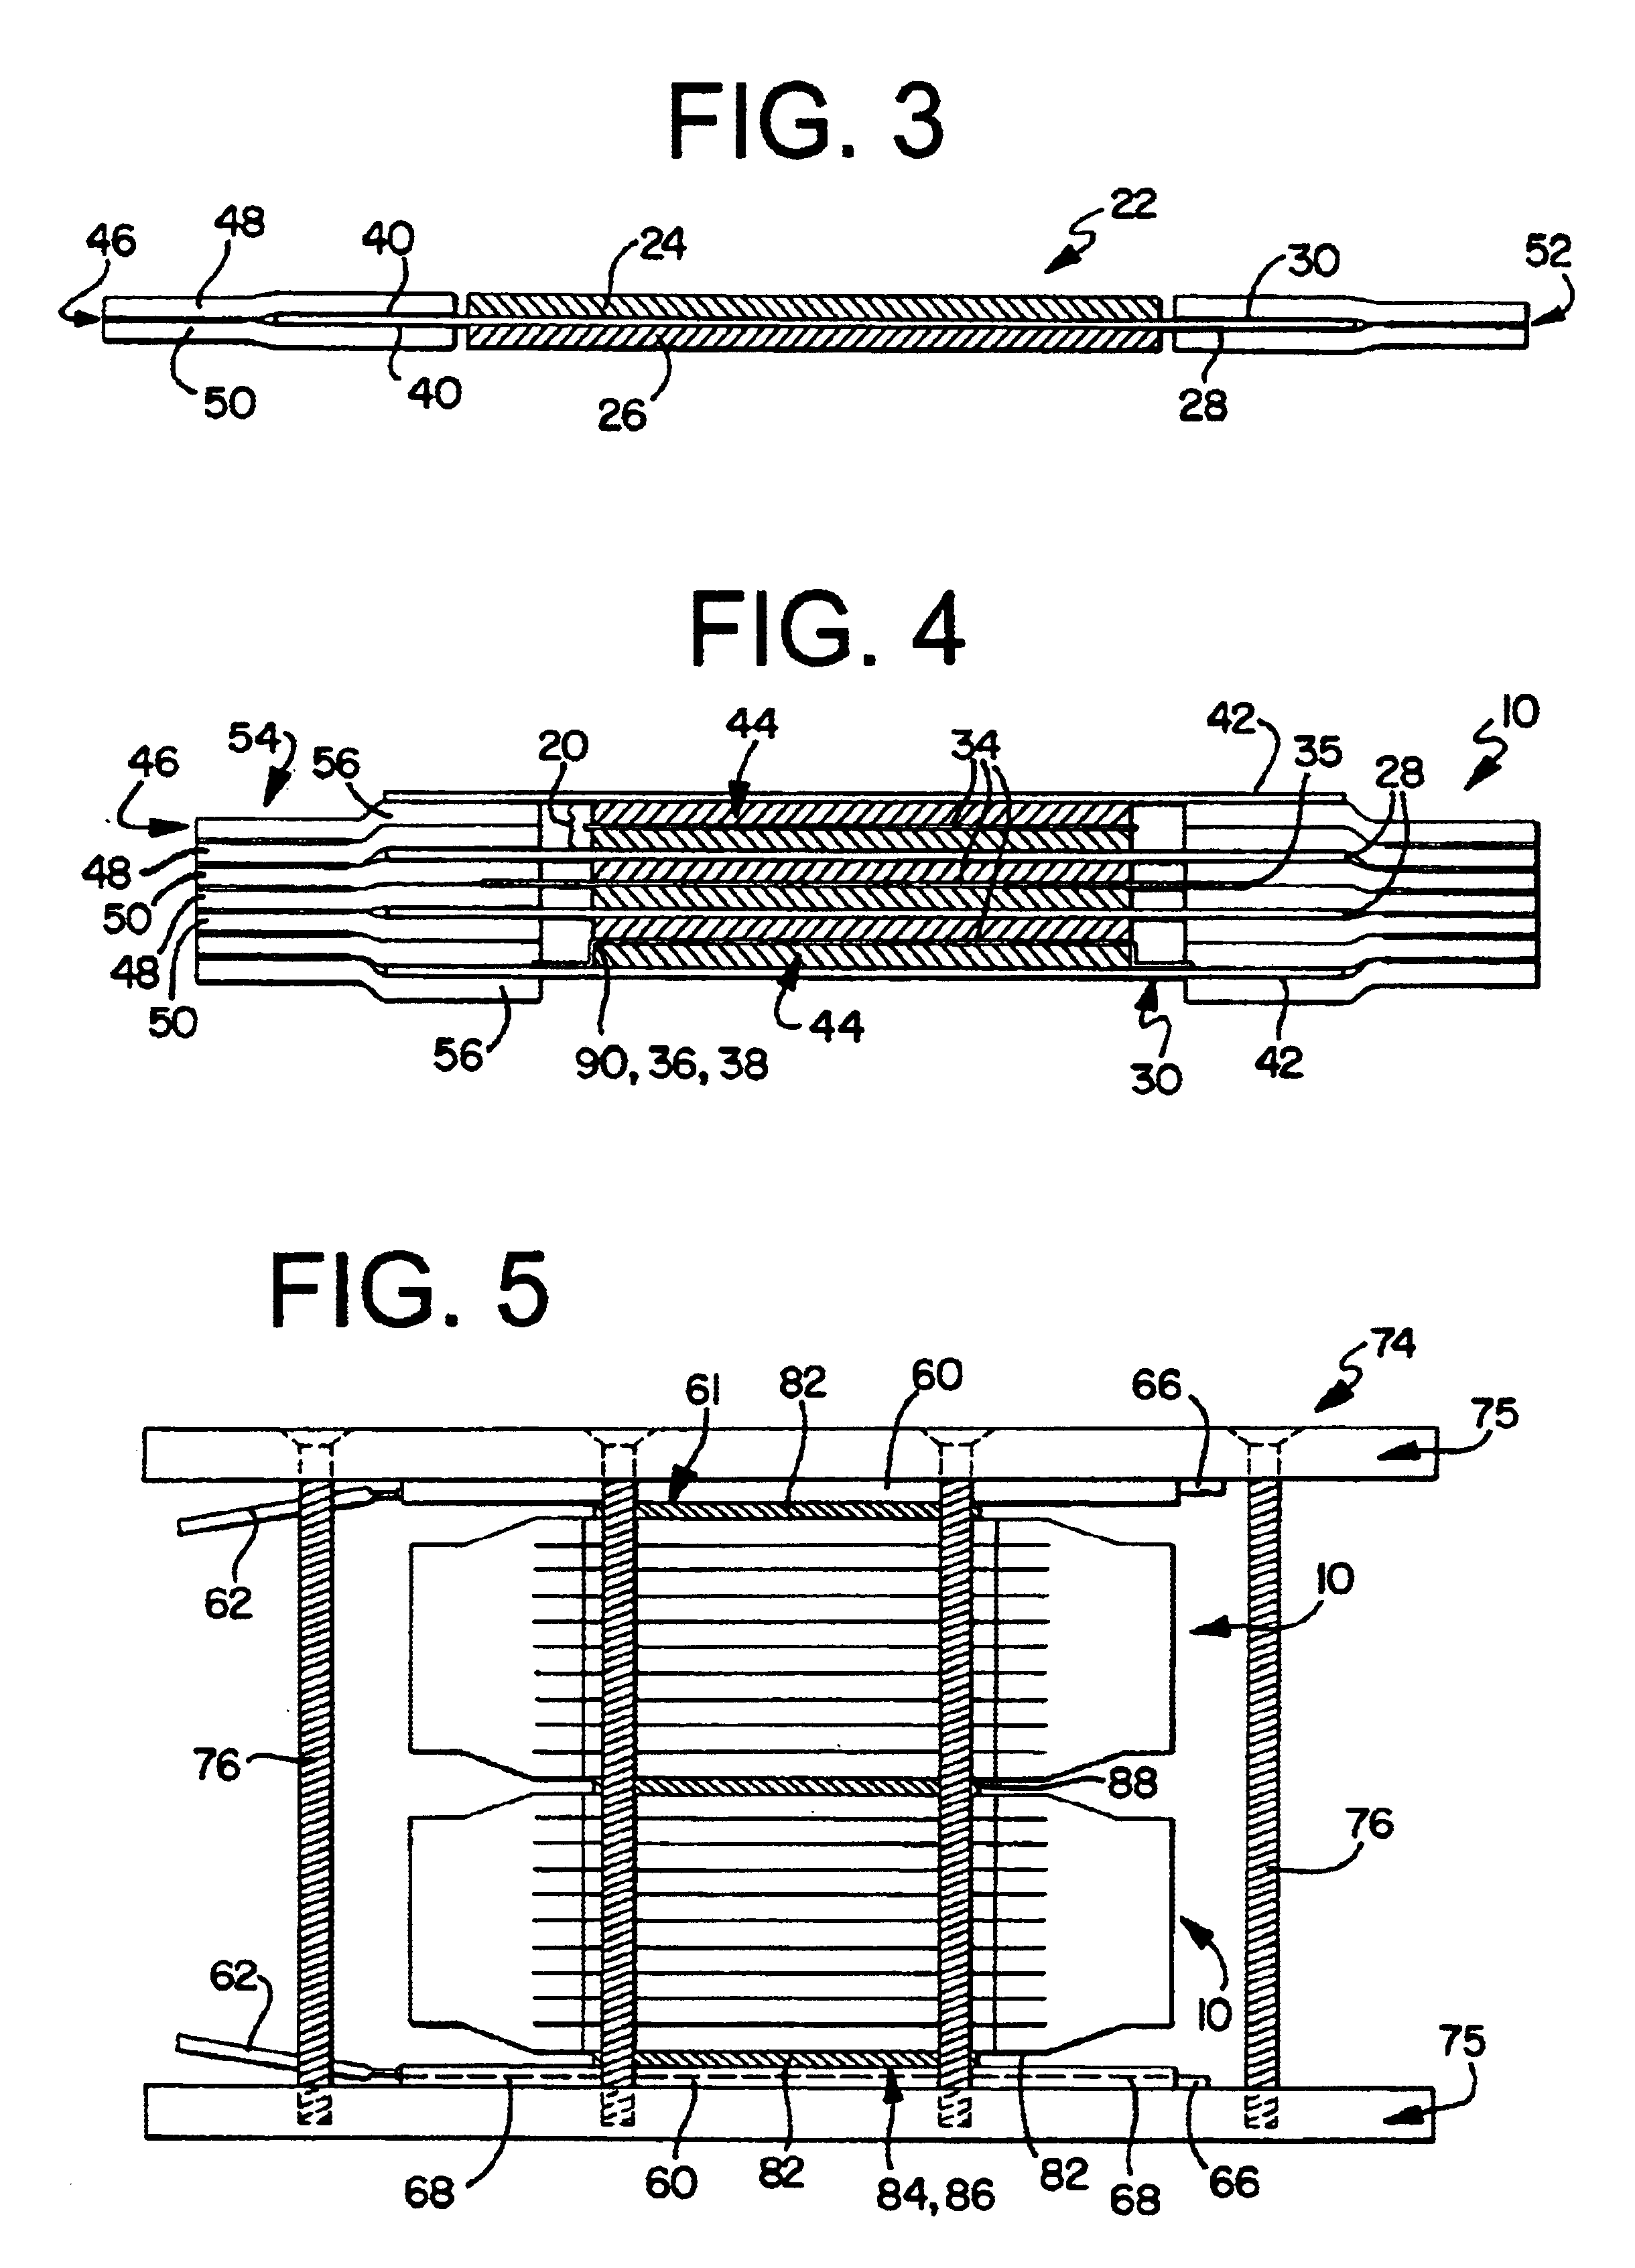 Rechargeable high power electrochemical device